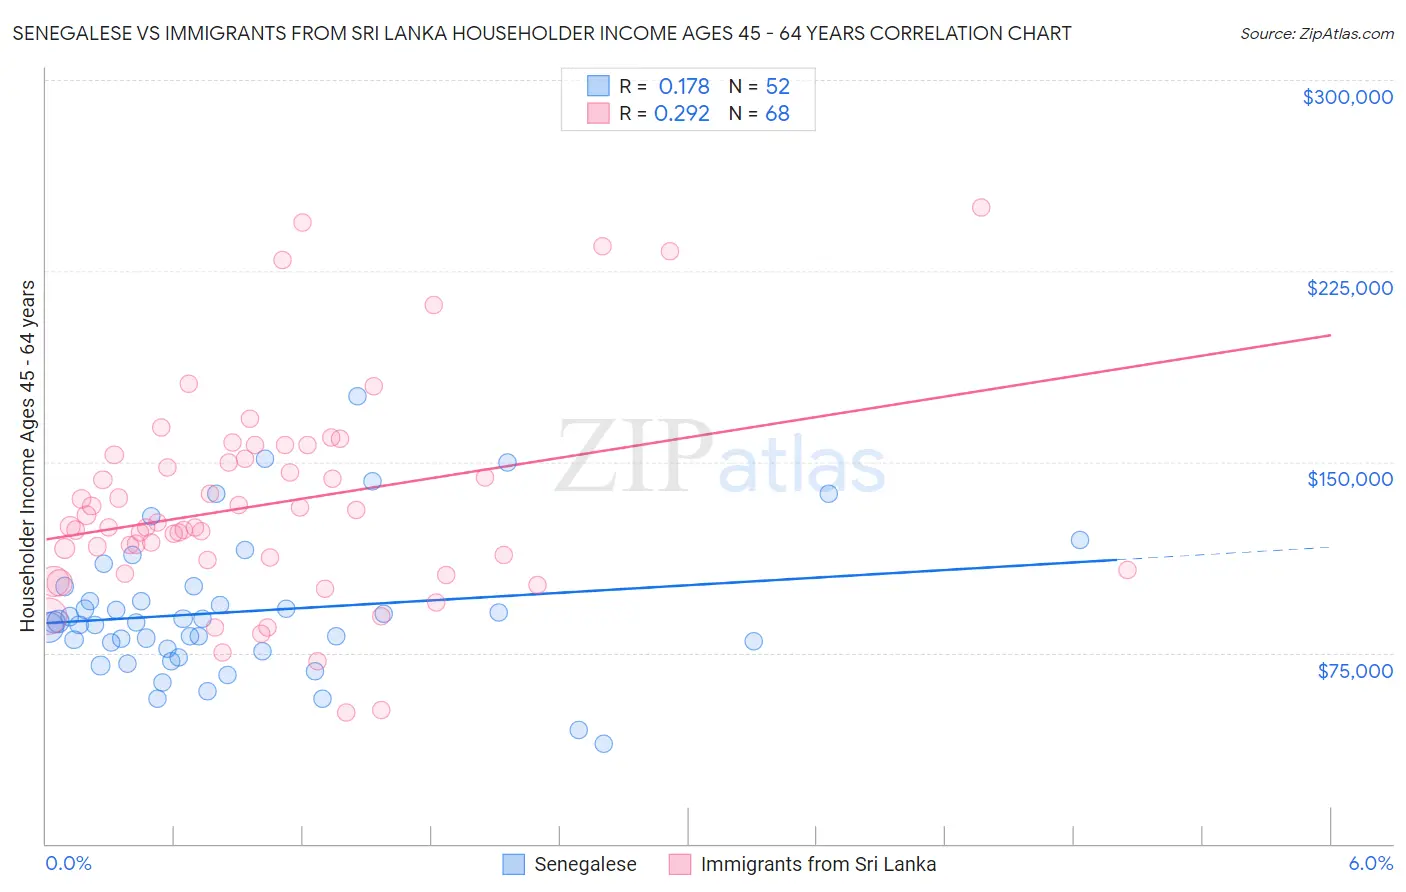 Senegalese vs Immigrants from Sri Lanka Householder Income Ages 45 - 64 years